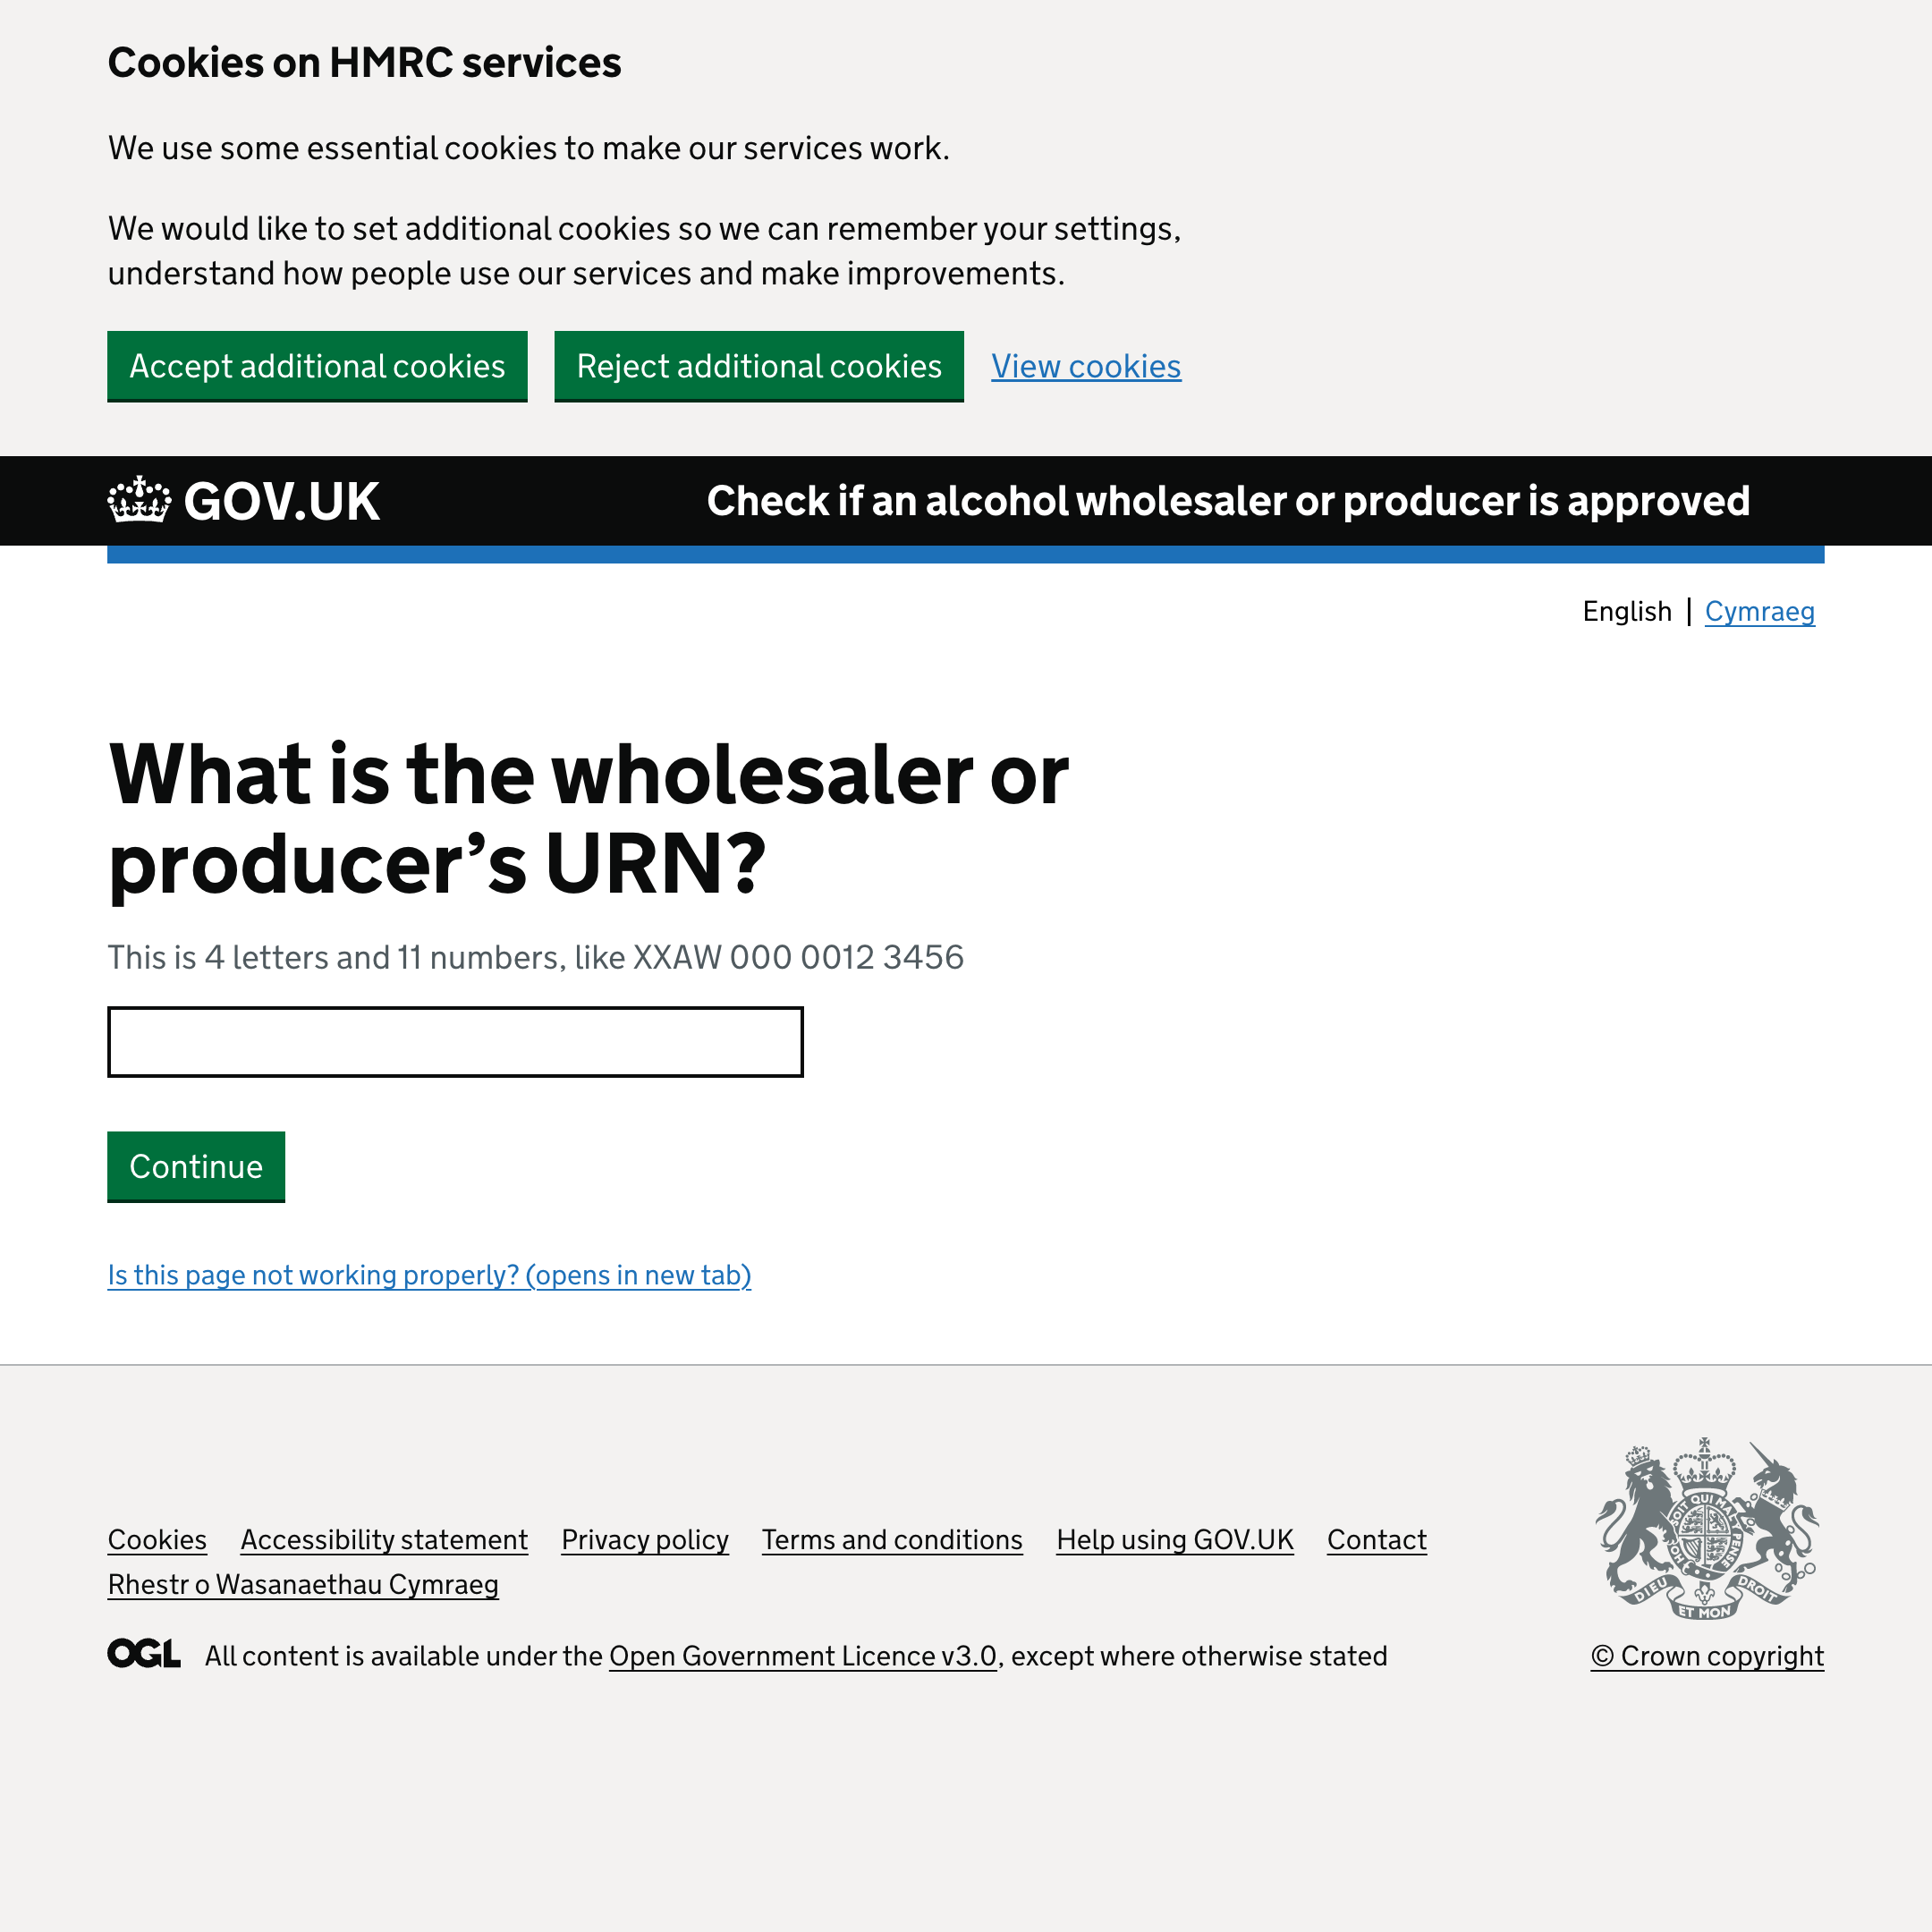 Check if an alcohol wholesaler or producer is approved